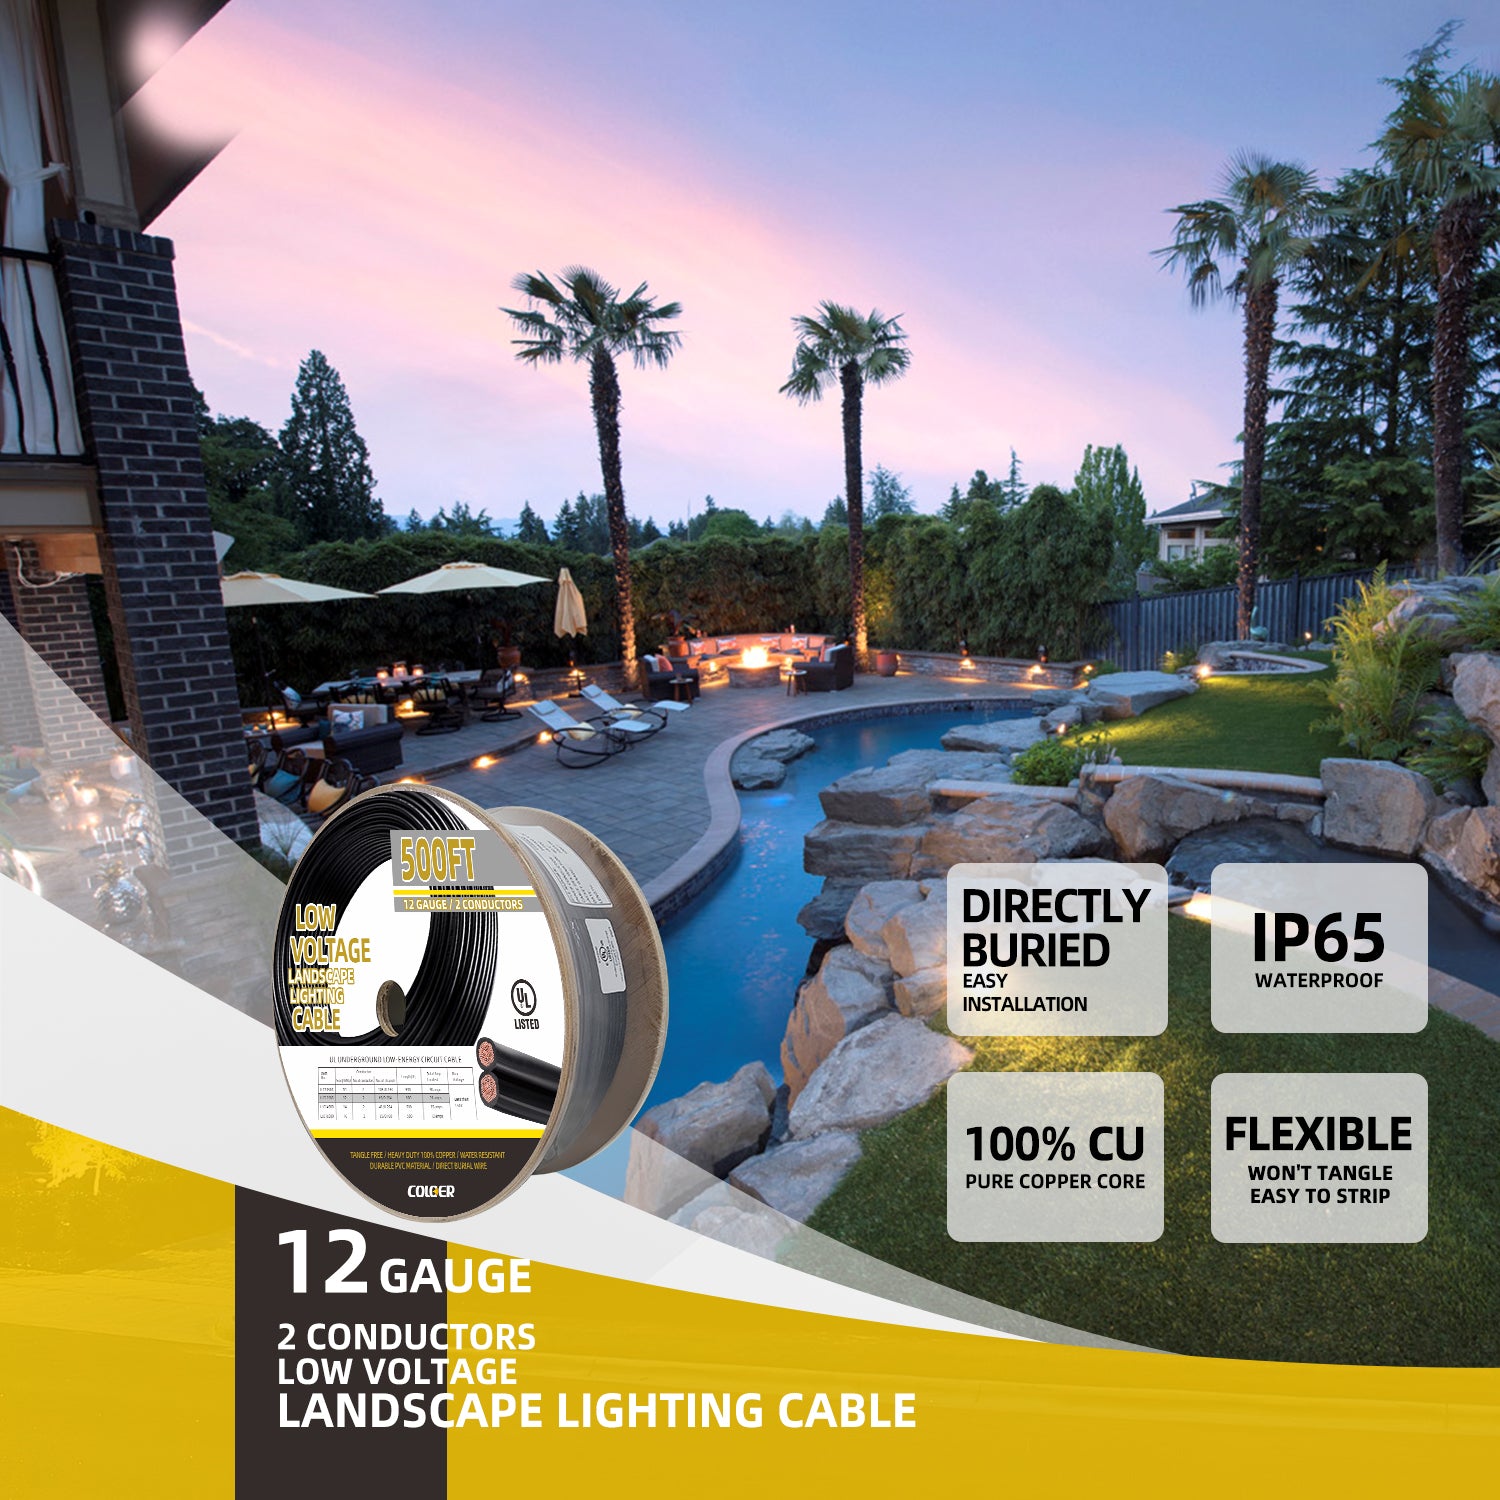 12 Gauge 2 Conductor Low Voltage Landscape Lighting Cable by COLOER. Features include easy installation, directly buried, IP65 waterproof, 100% pure copper core, and flexible design. Image shows a coil of cable and a backyard with landscape lighting.